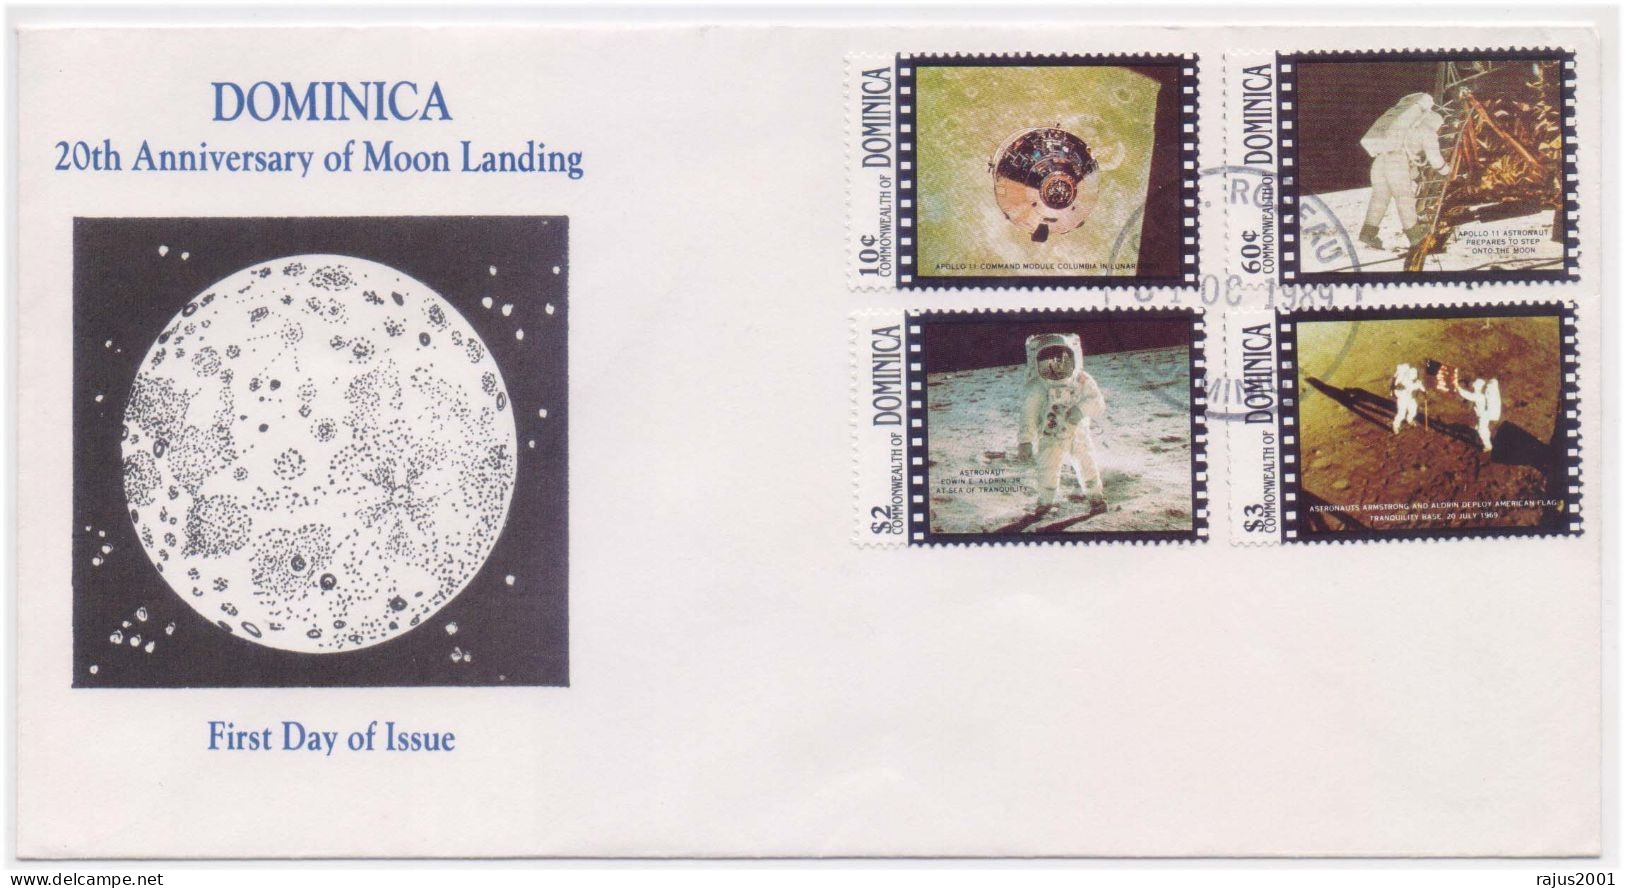 NASA  Apollo II Mission, Module Columbia, Lunar Module Eagle First Landing On The Moon, Space, Science, Astronomy FDC - Astronomùia